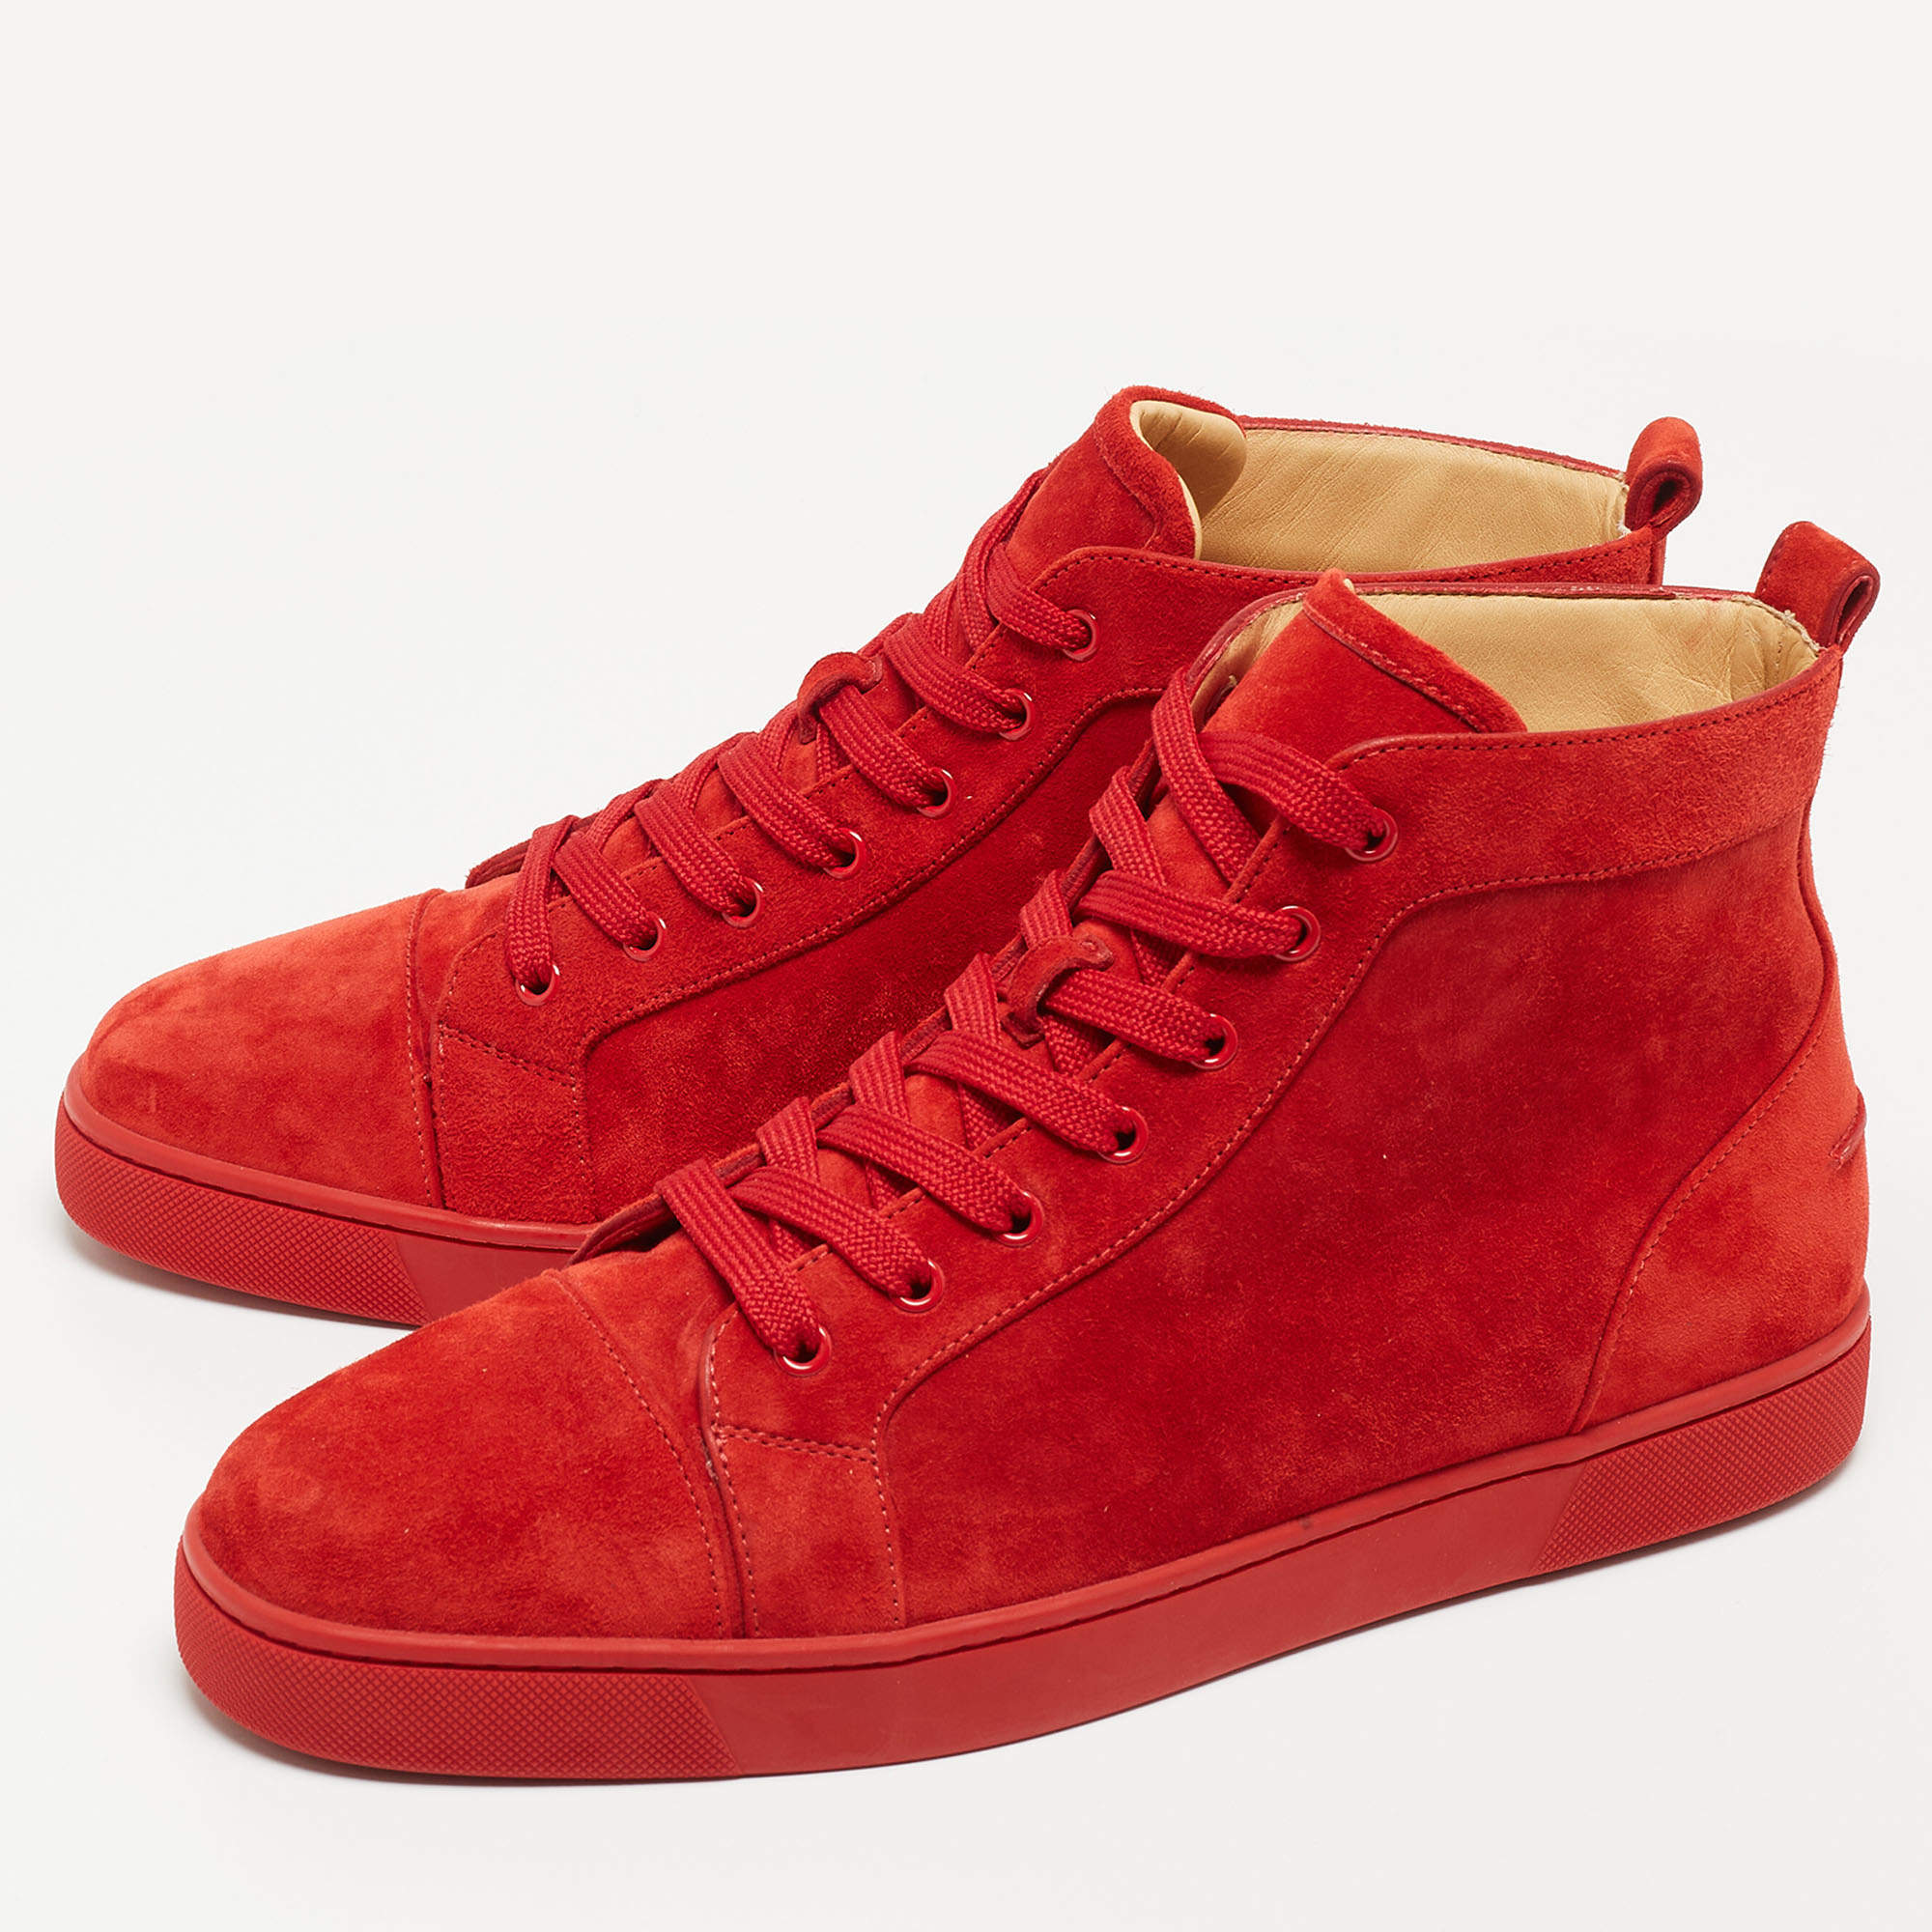 Louis Vuitton Printed Chunky Sneakers - Red Sneakers, Shoes - LOU773368